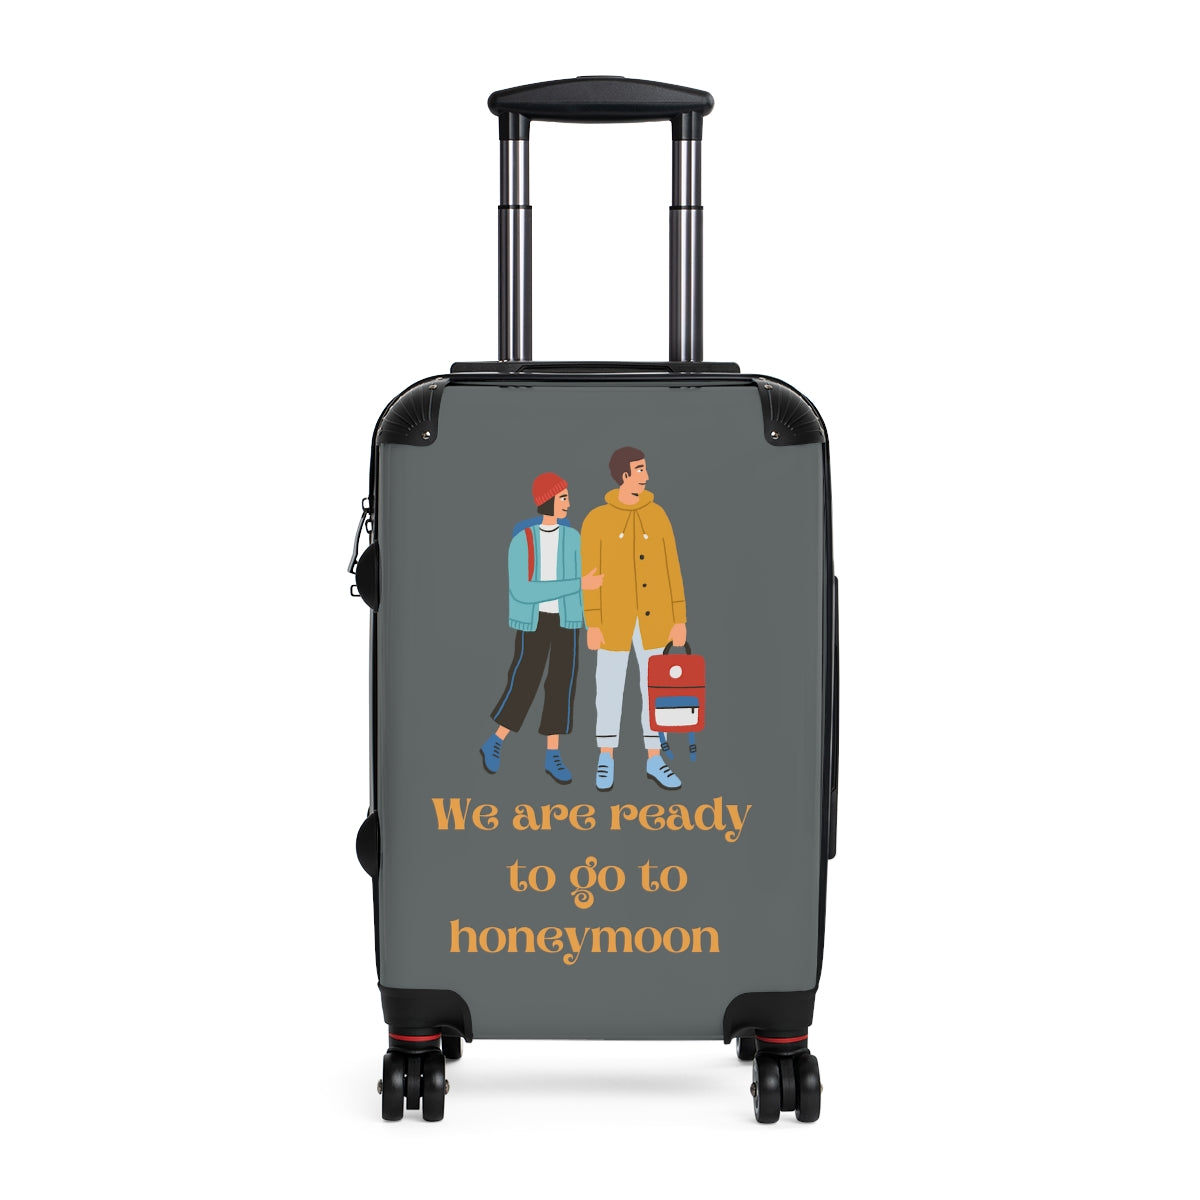 KIDS CARRY-ON SUITCASES, HEARTS, LUGGAGE BY ARTZIRA, ARTISTIC DESIGNS, DOUBLE WHEELED SPINNER